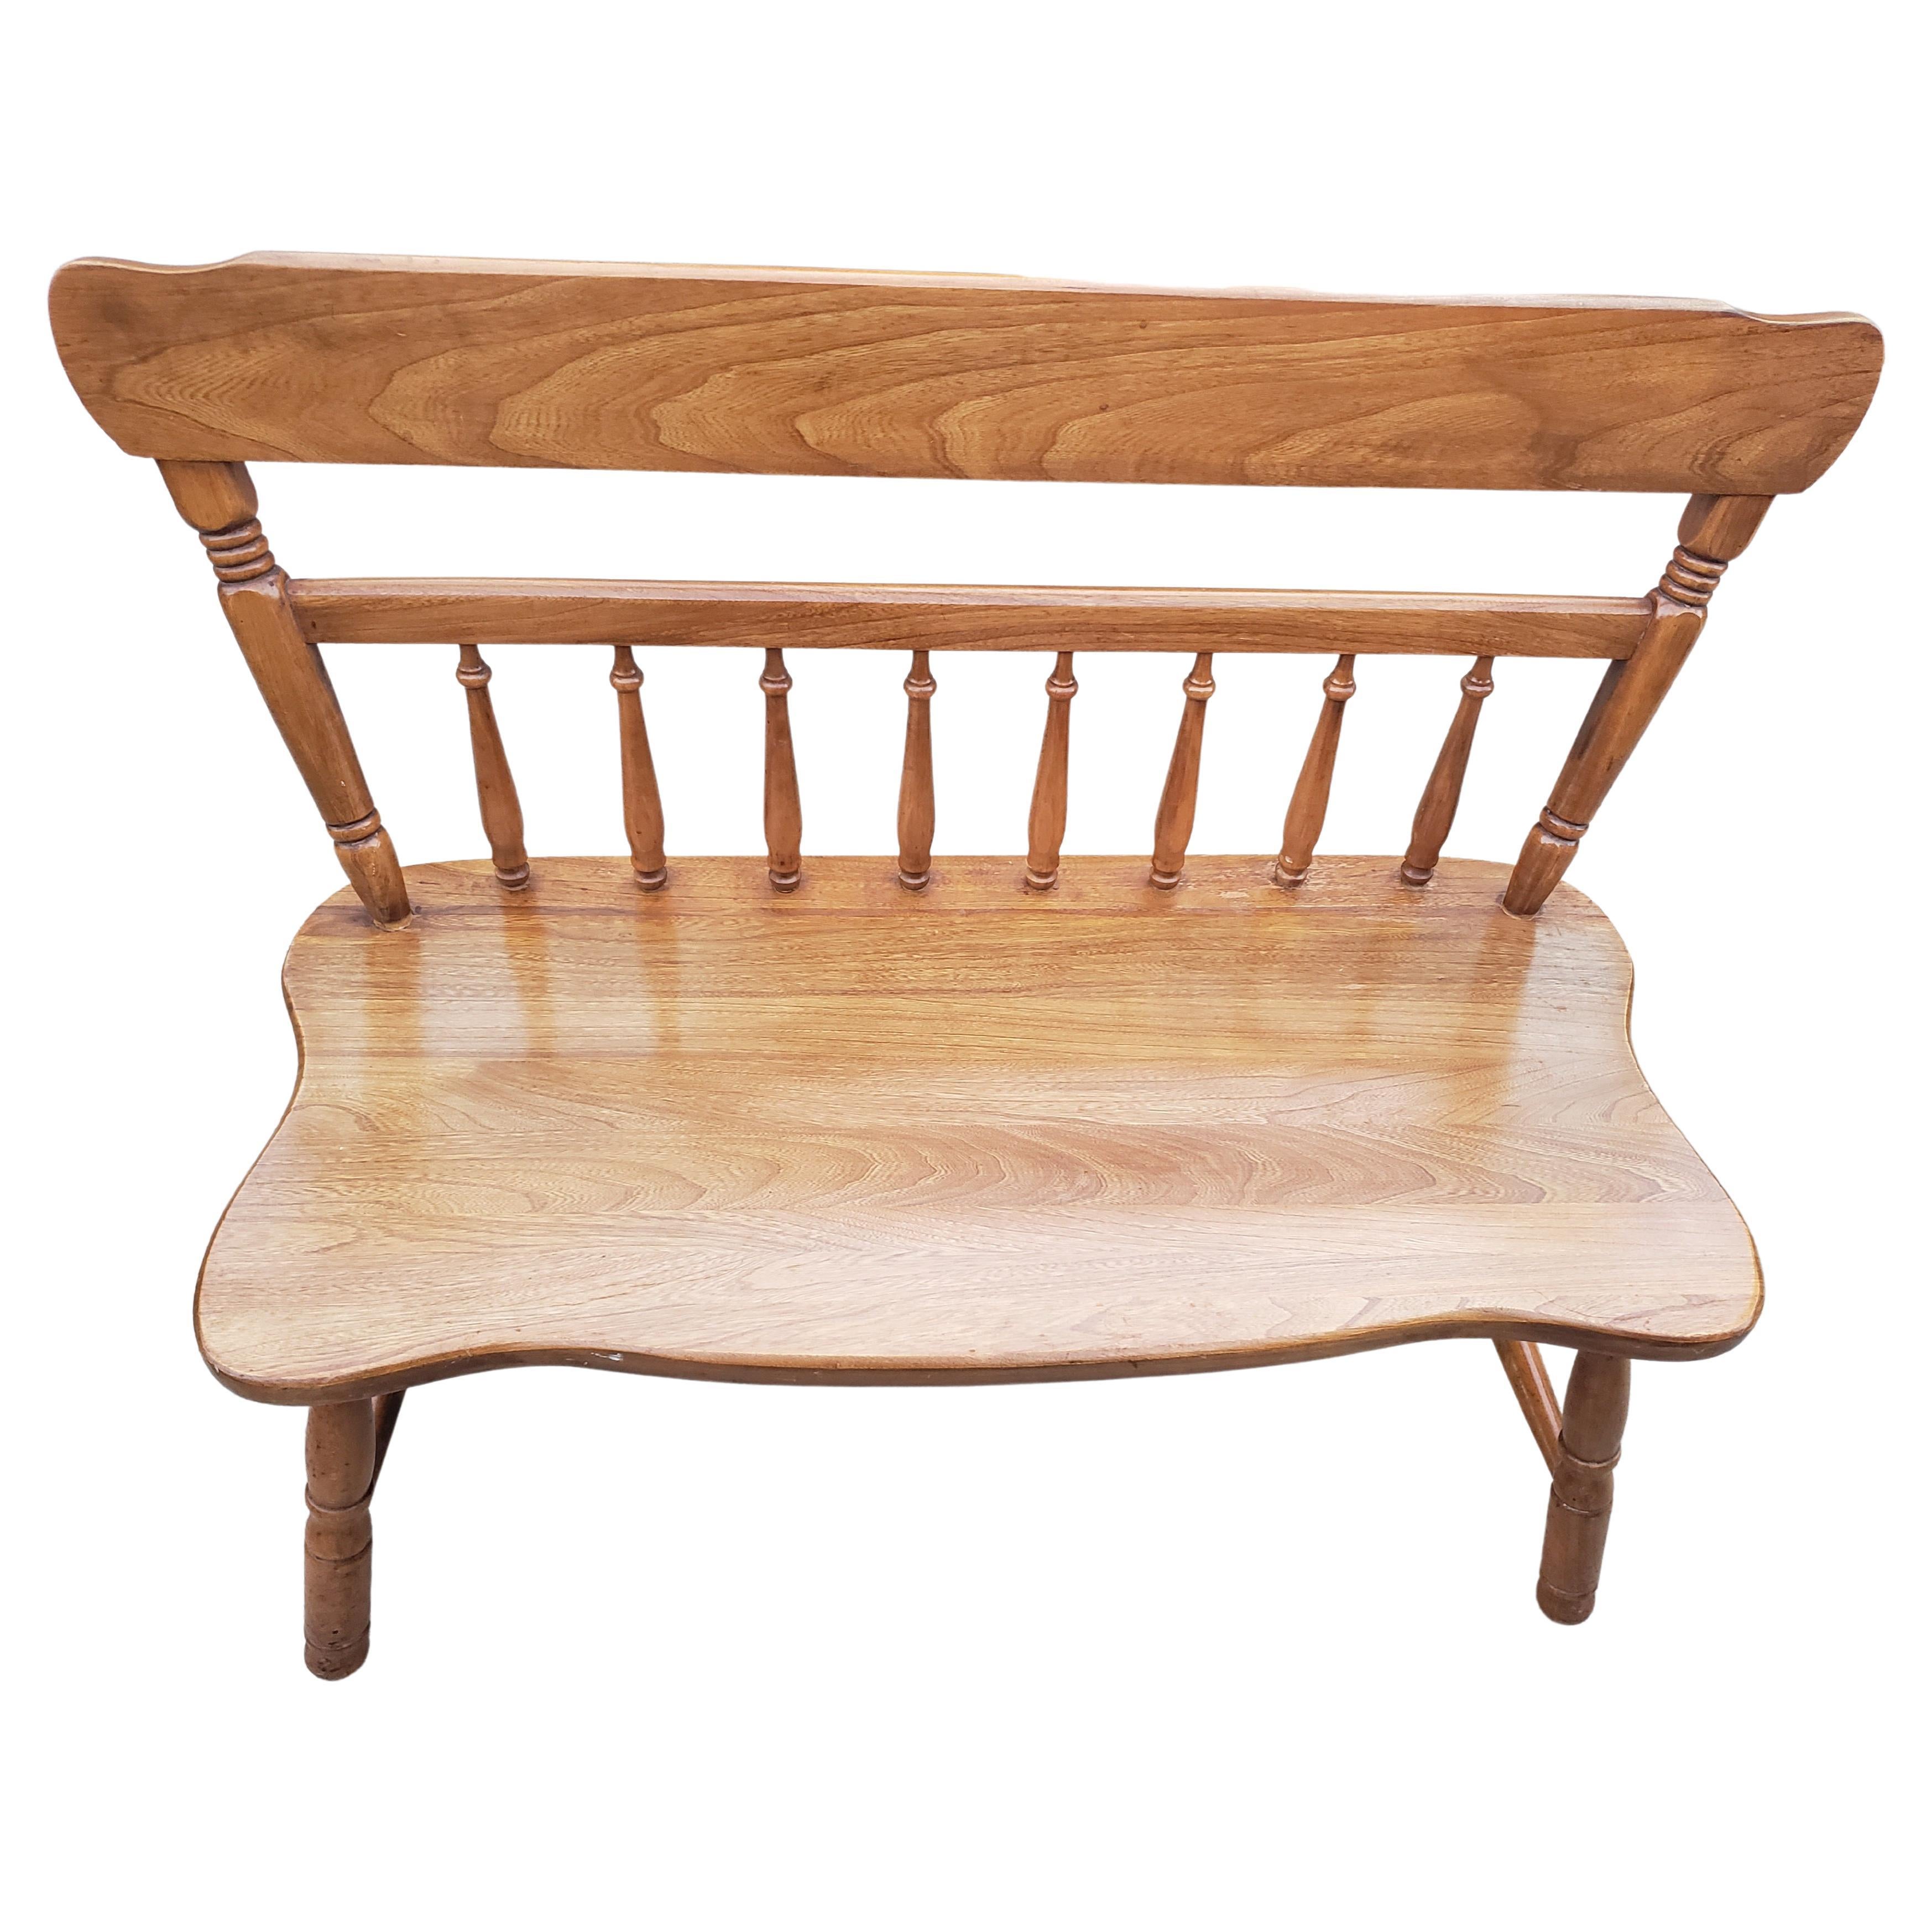 20th Century Solid Red Oak Farm House Style Two-Seat Bench Settee, Circa 1970s For Sale